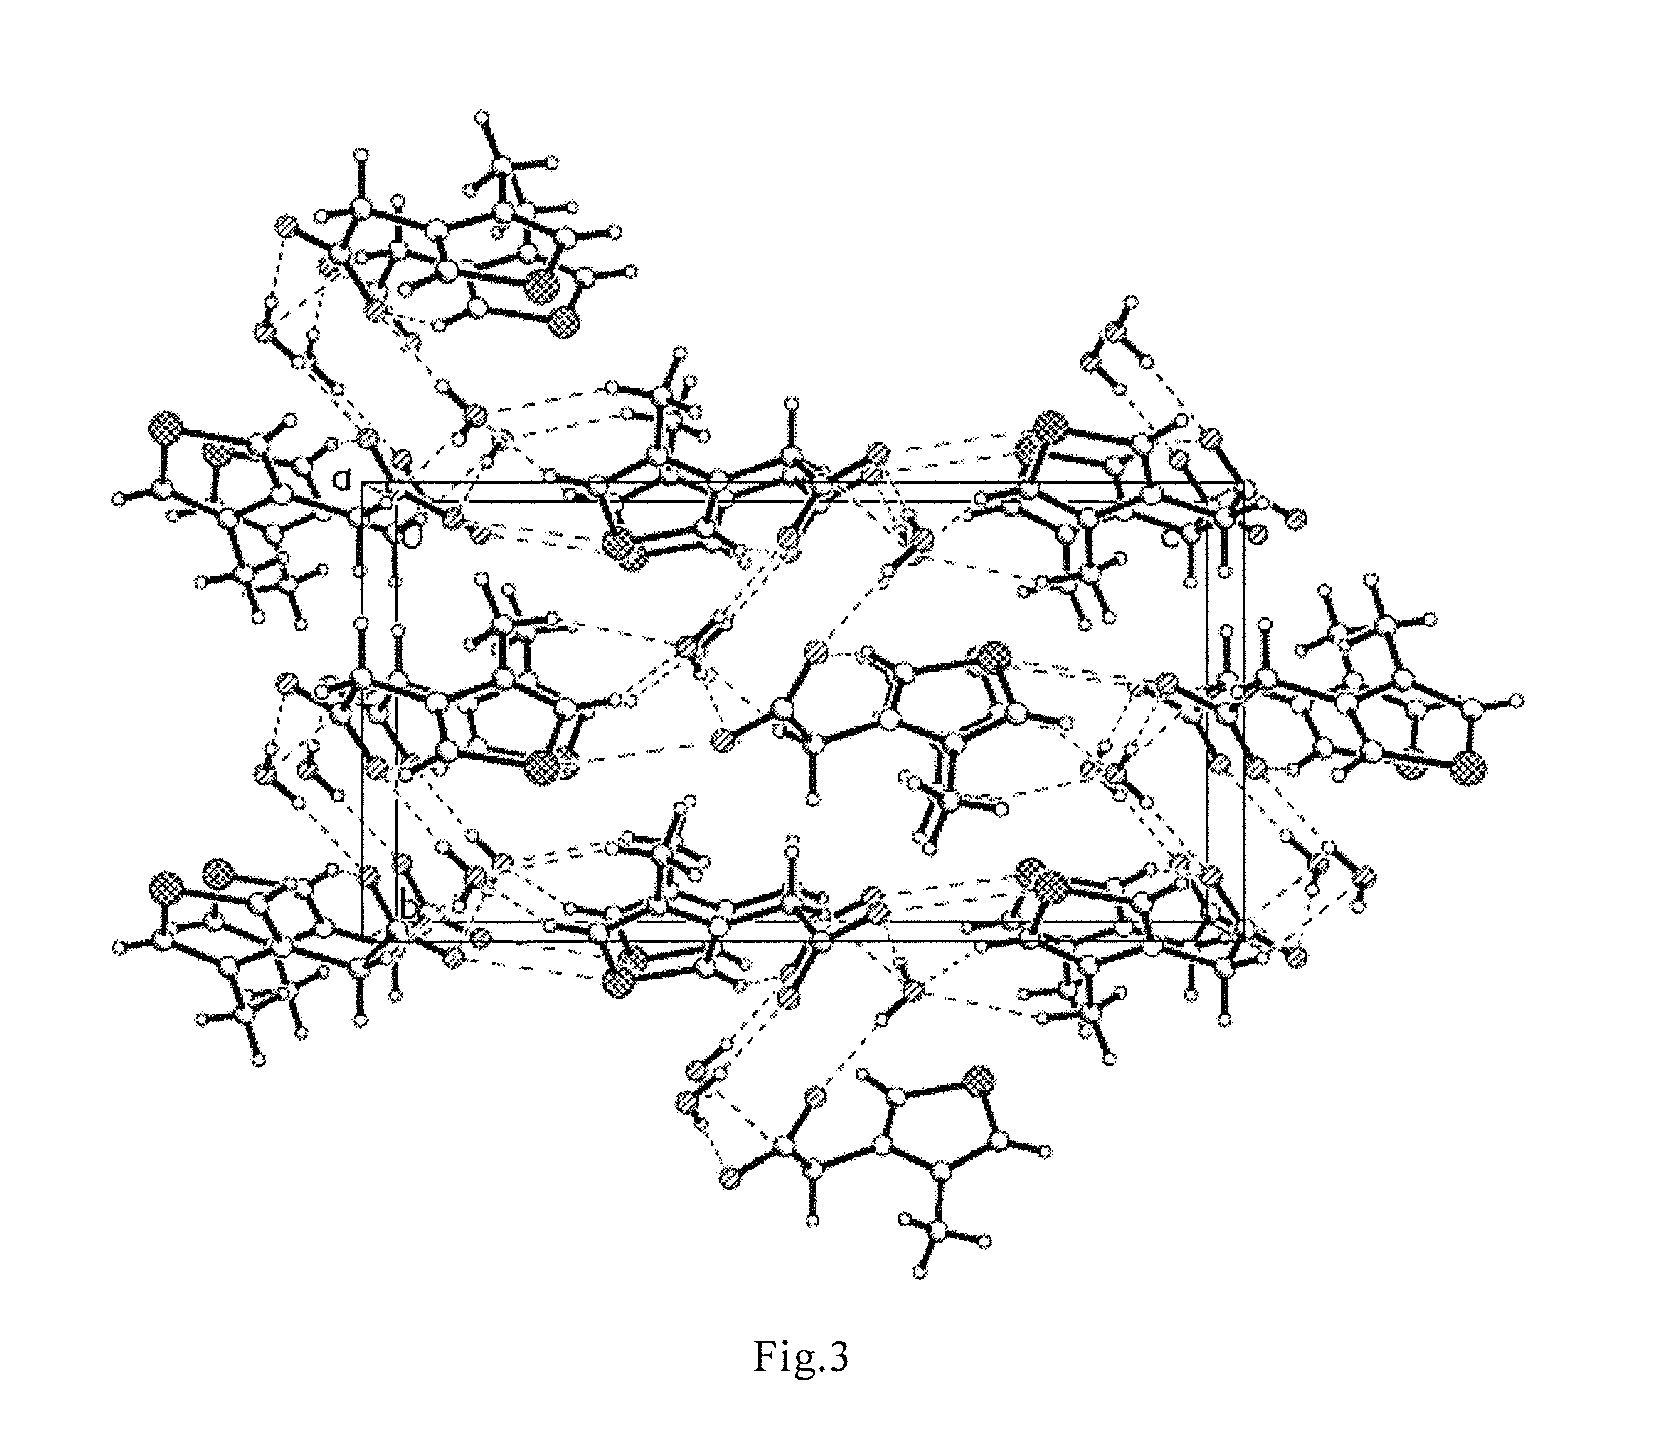 Thiazole Inner Salt Compounds, and Preparation Methods and Uses Thereof